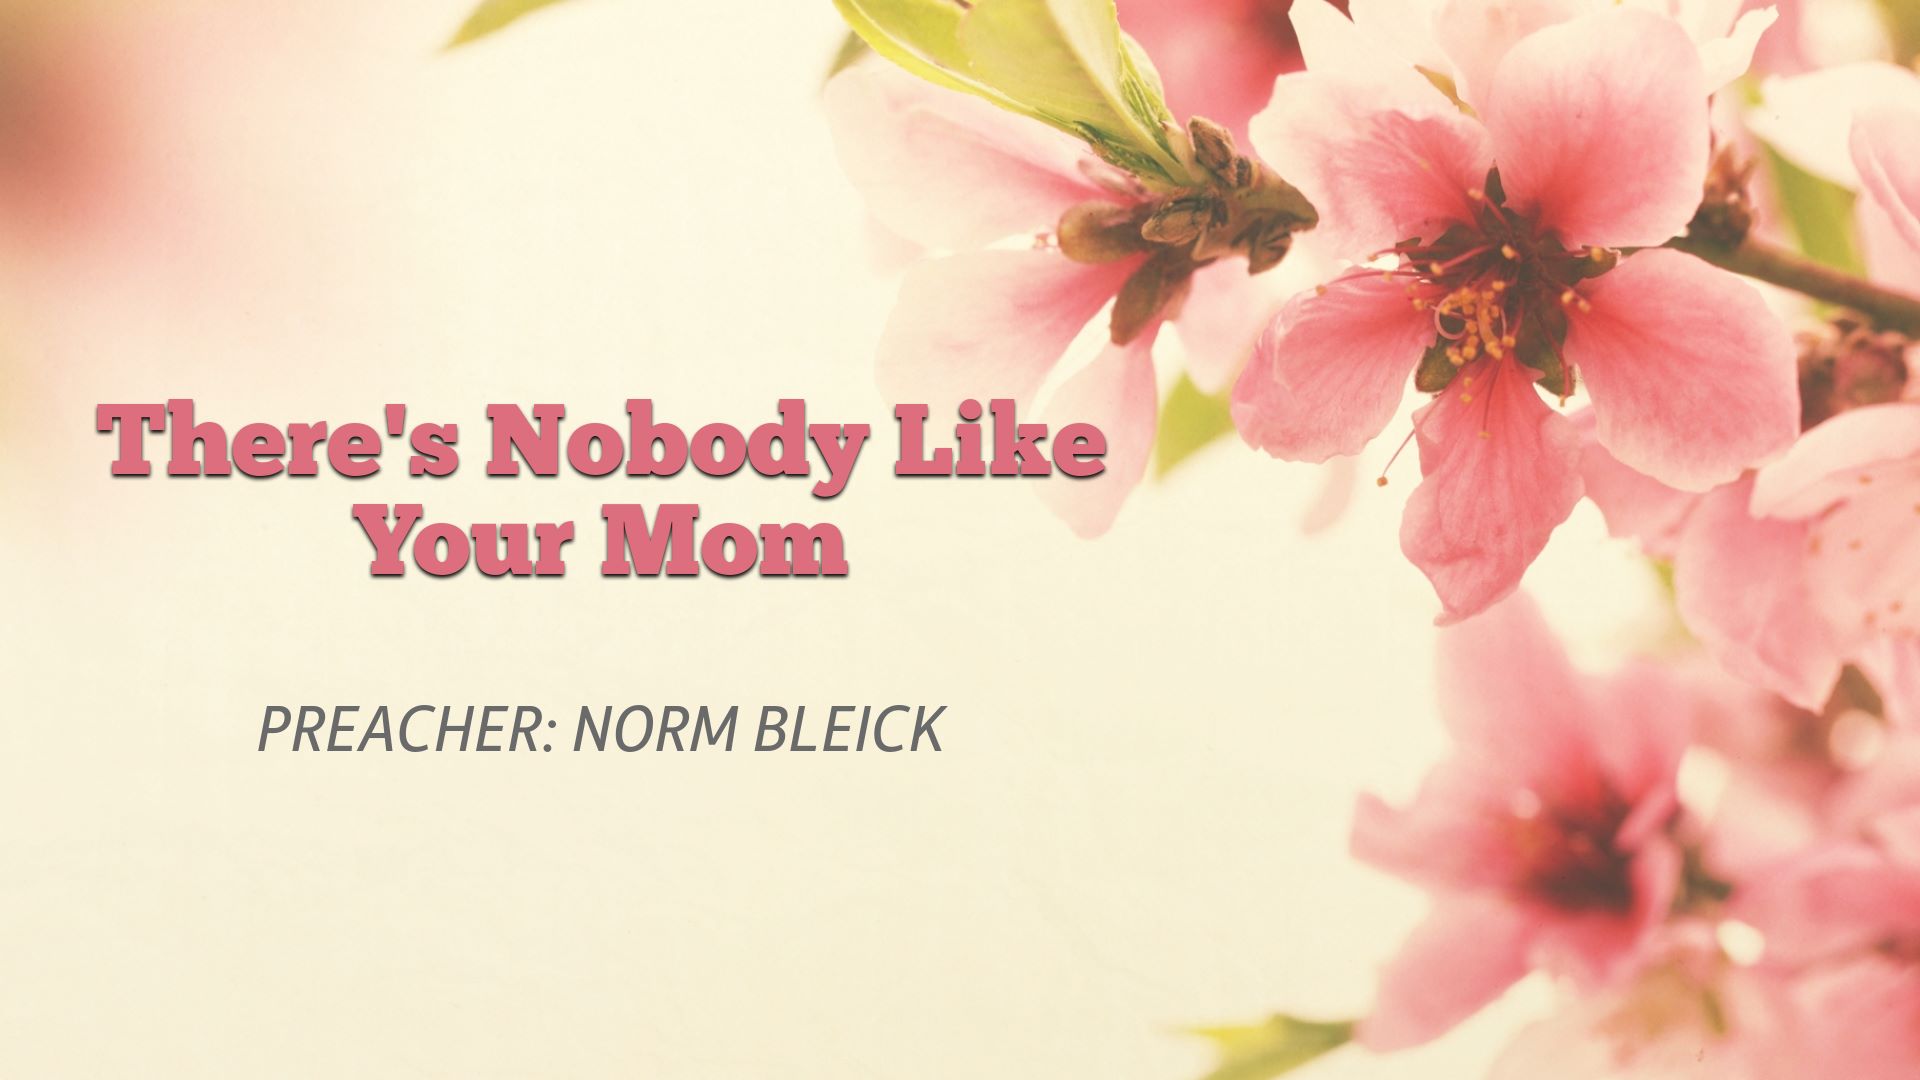 There’s Nobody Like Your Mom